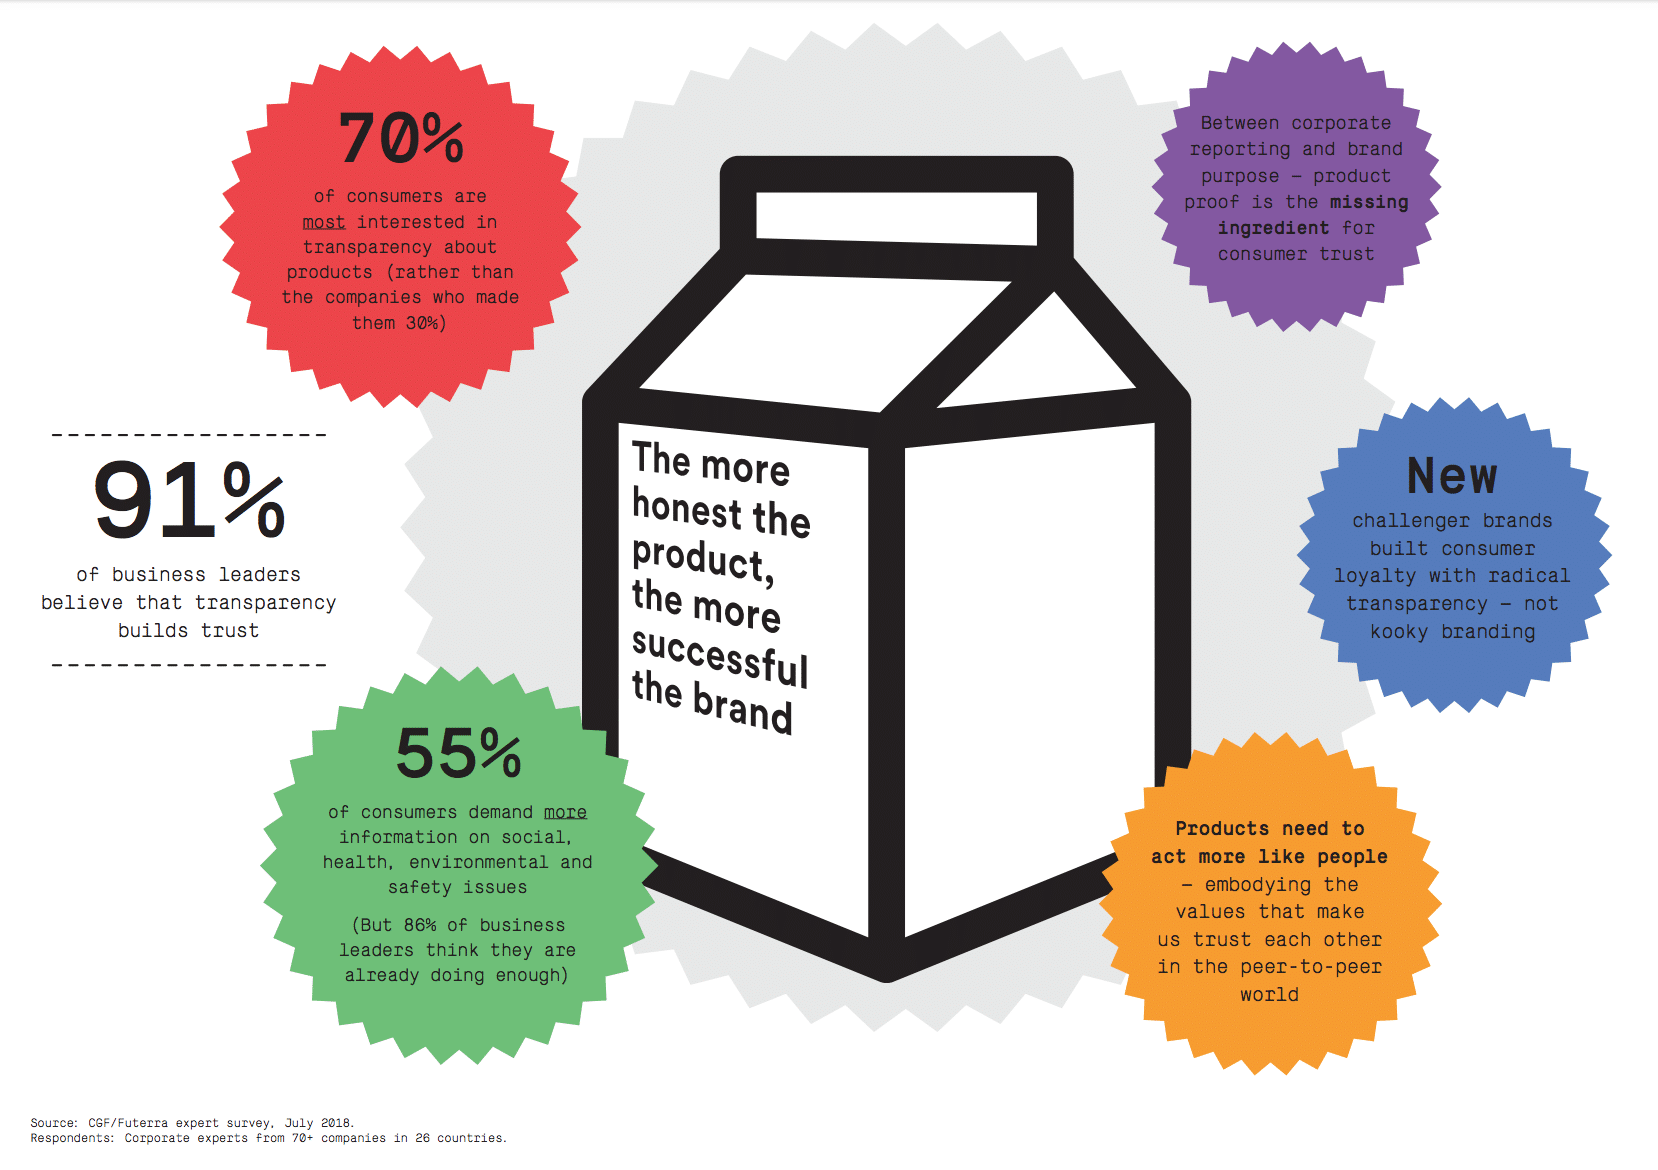 For transparency-starved consumers, the future belongs to honest products